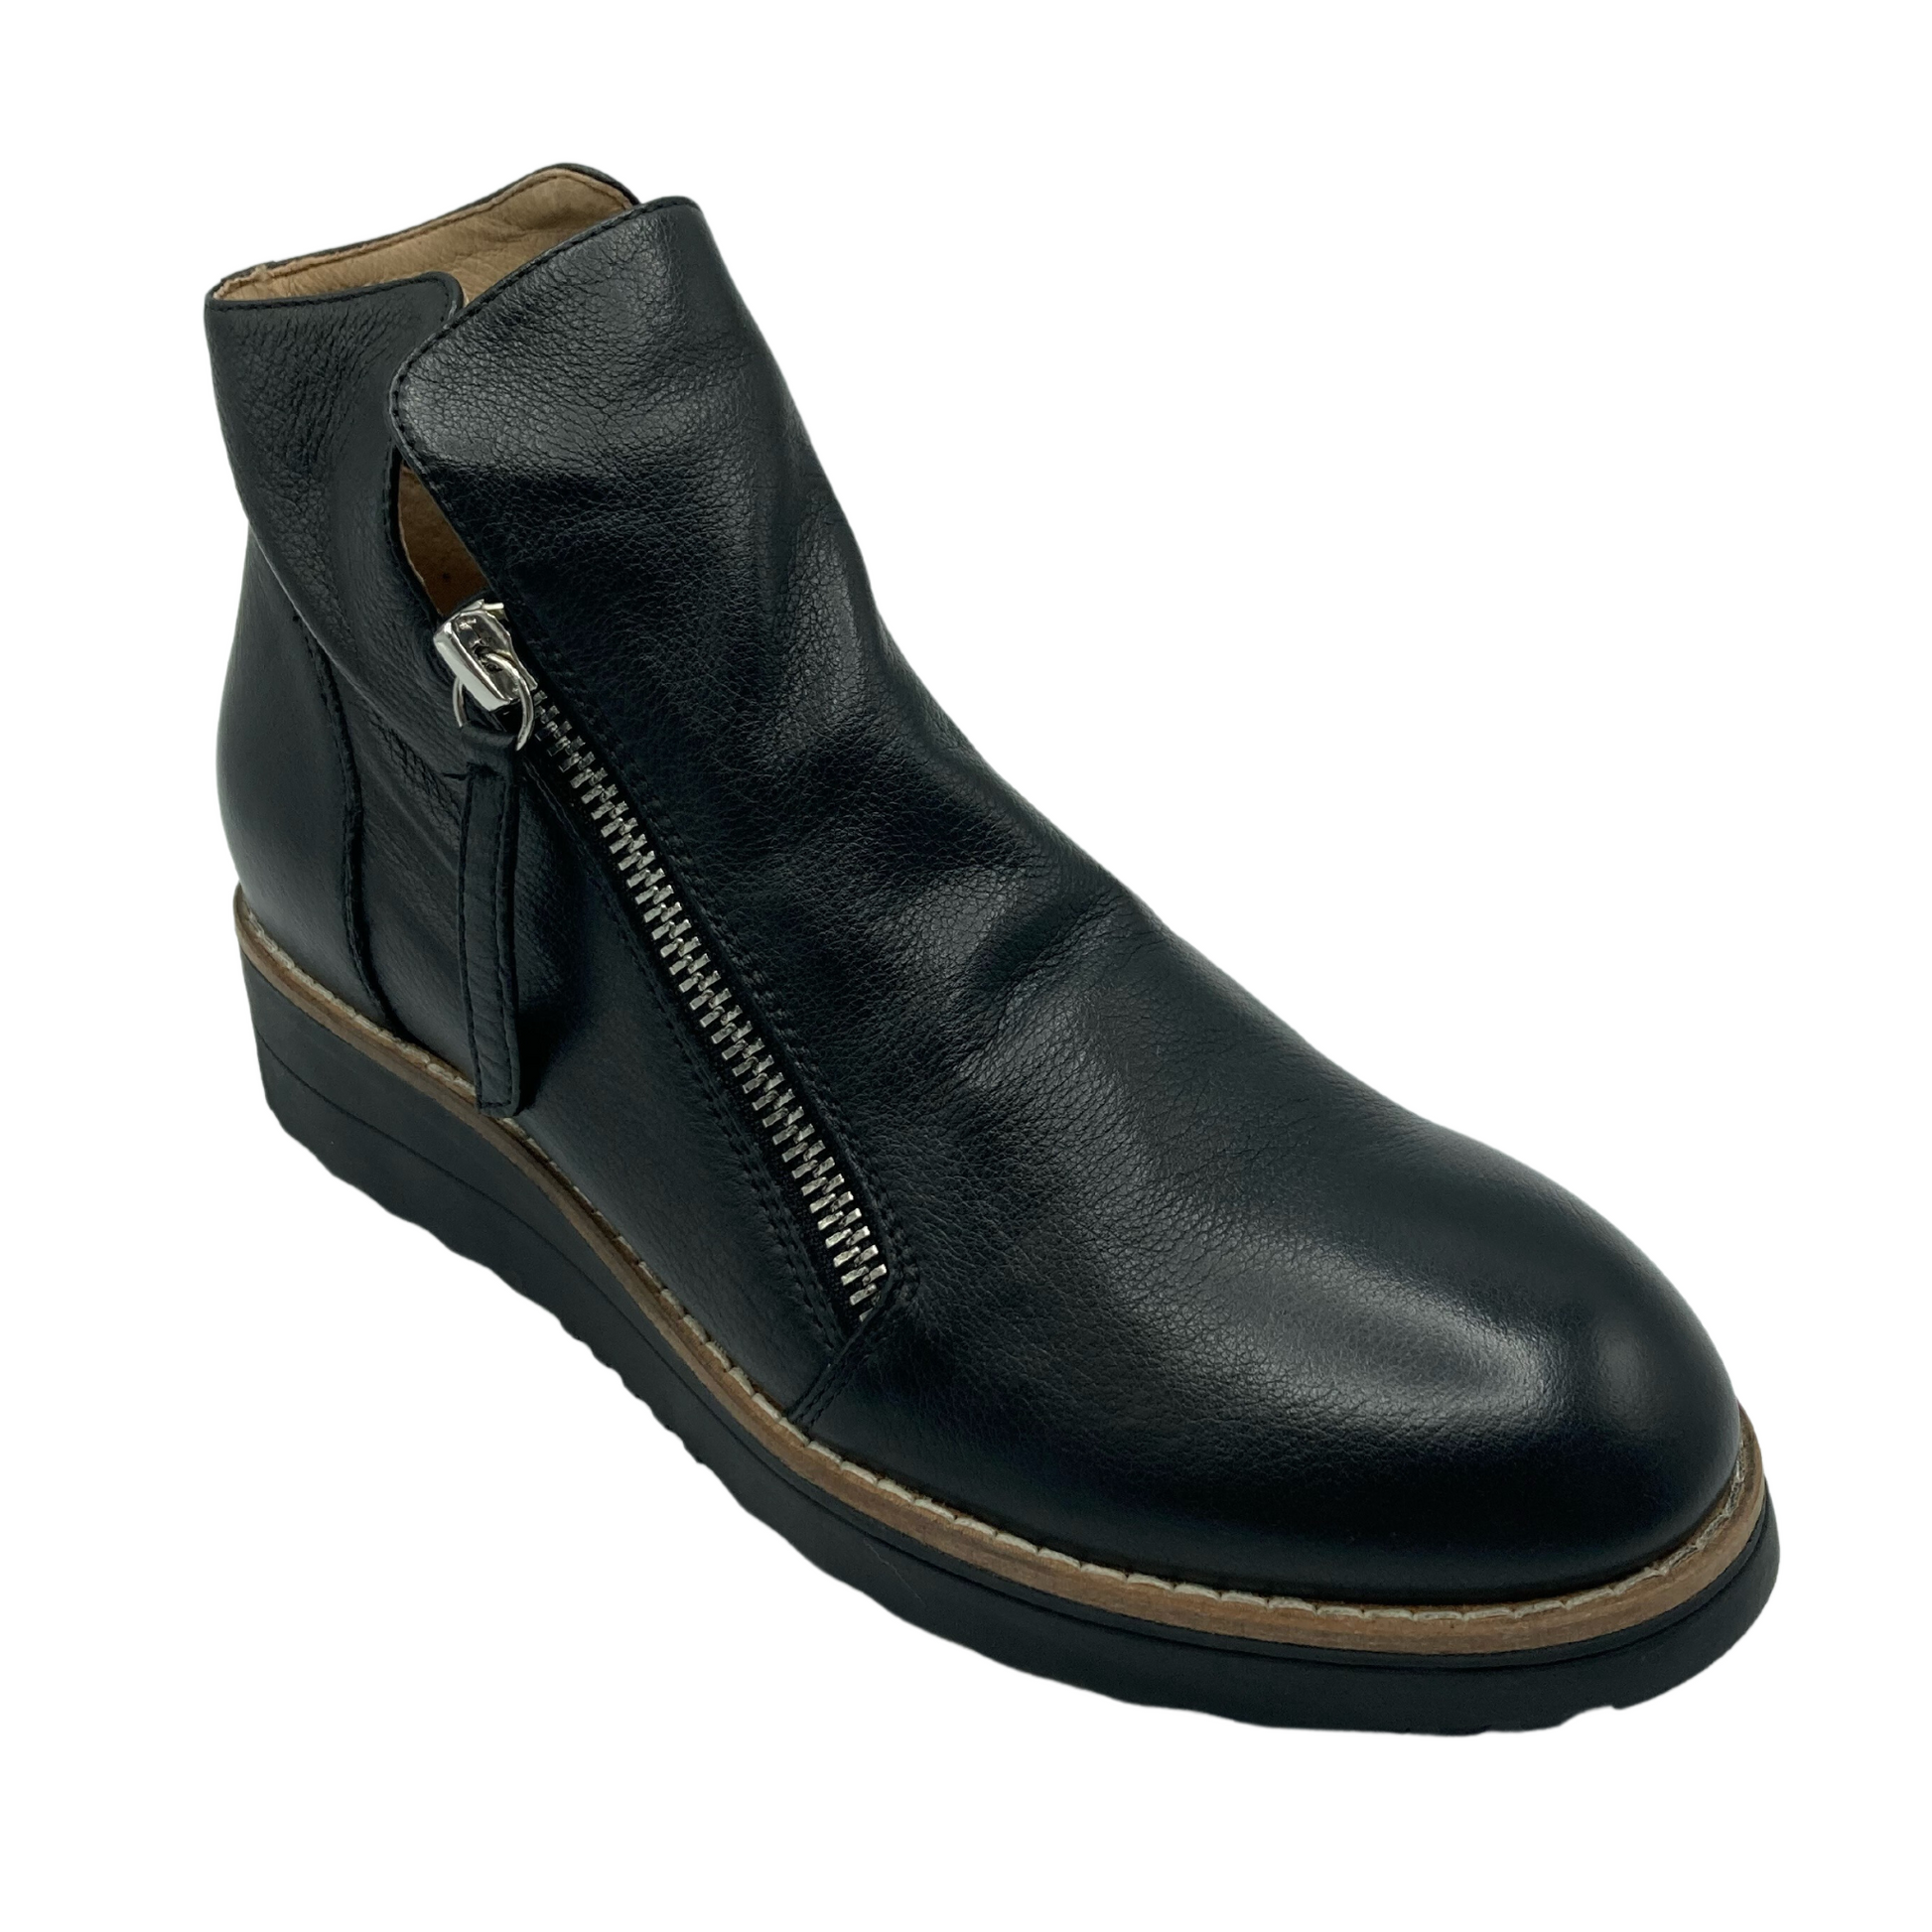 45 degree angled view of short black leather boot with silver zipper and black rubber sole